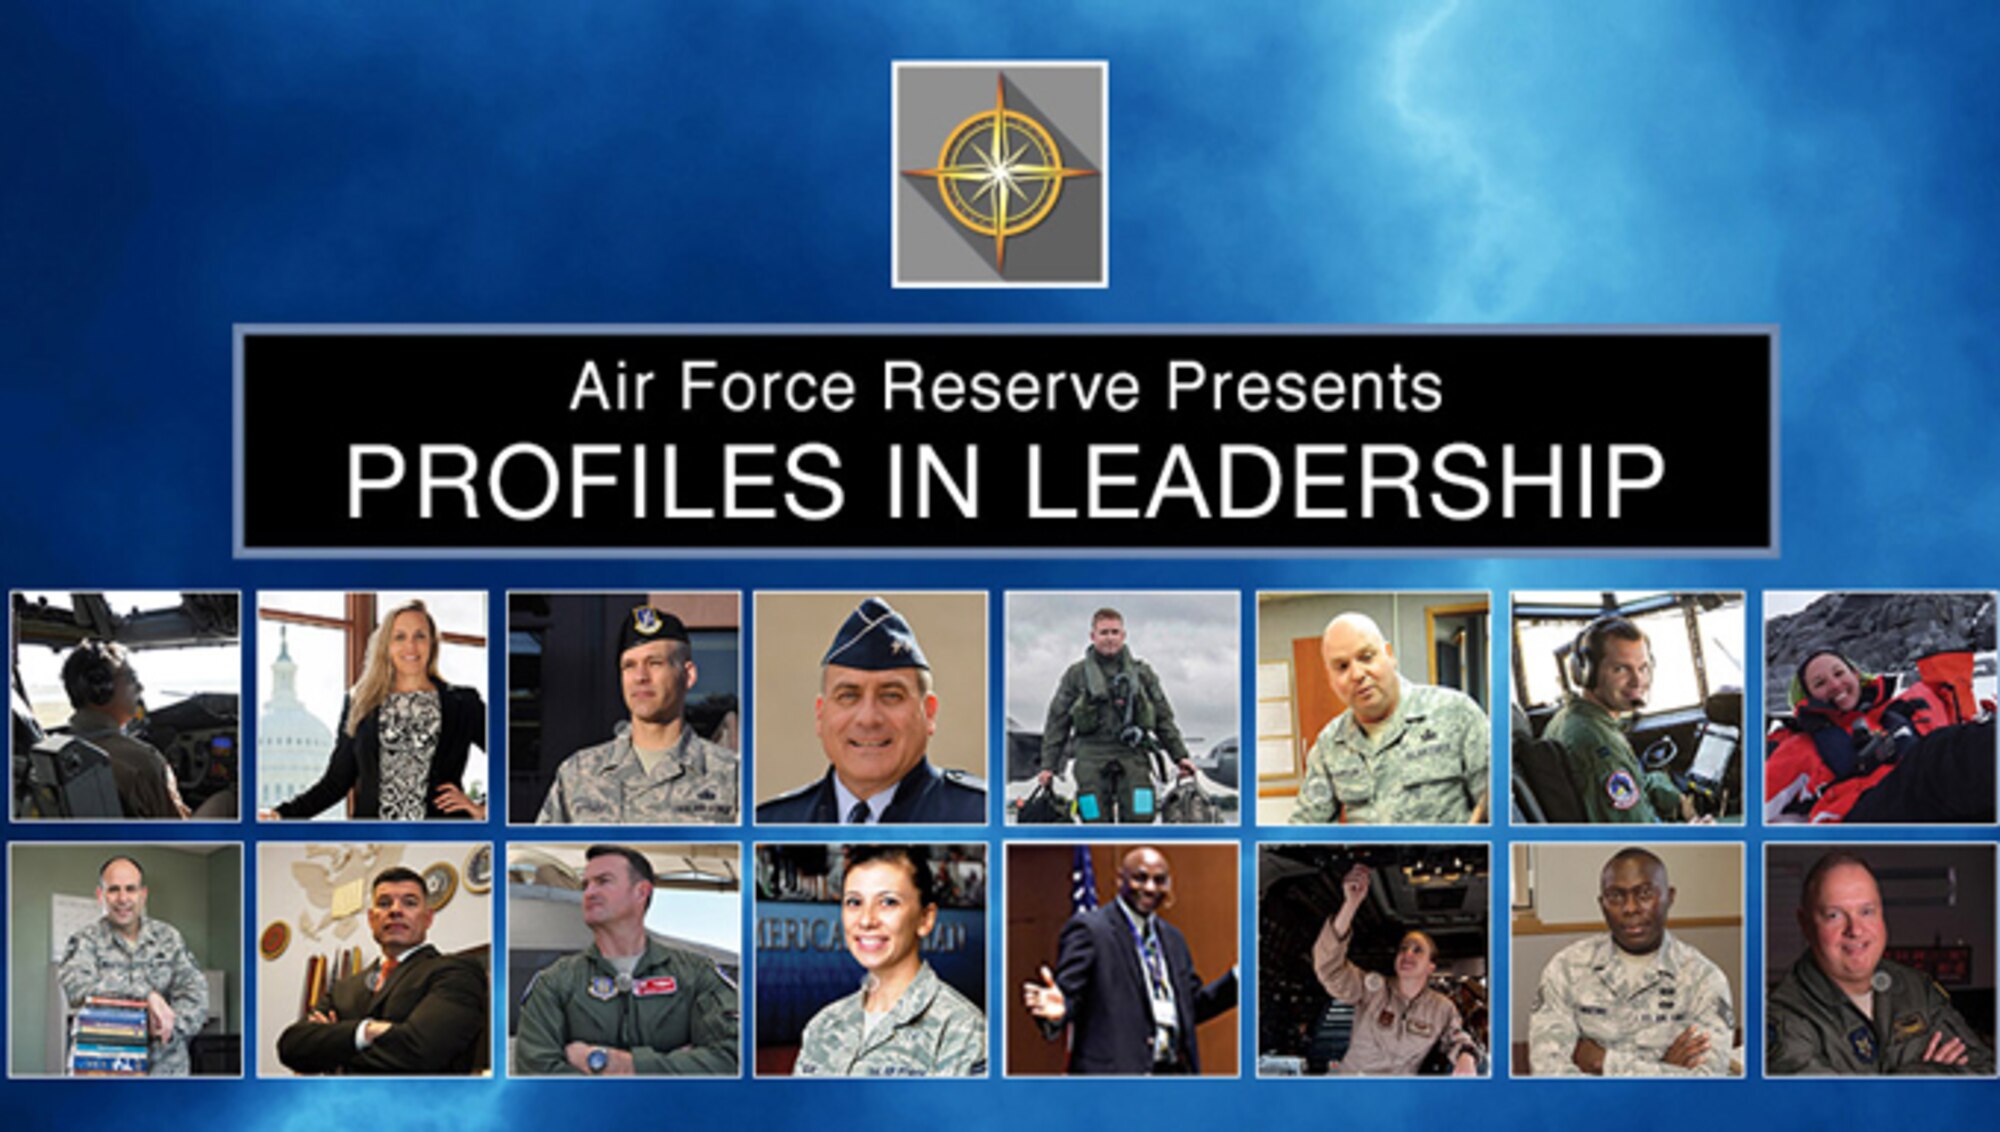 The Office of the Air Force Reserve unveiled 16 portraits of Air Force Reserve leaders in the Profiles in Leadership display here last week. The display celebrates and honors Citizen Airmen’s contributions in serving the nation. (U.S. Air Force graphic/Adam Butterick)